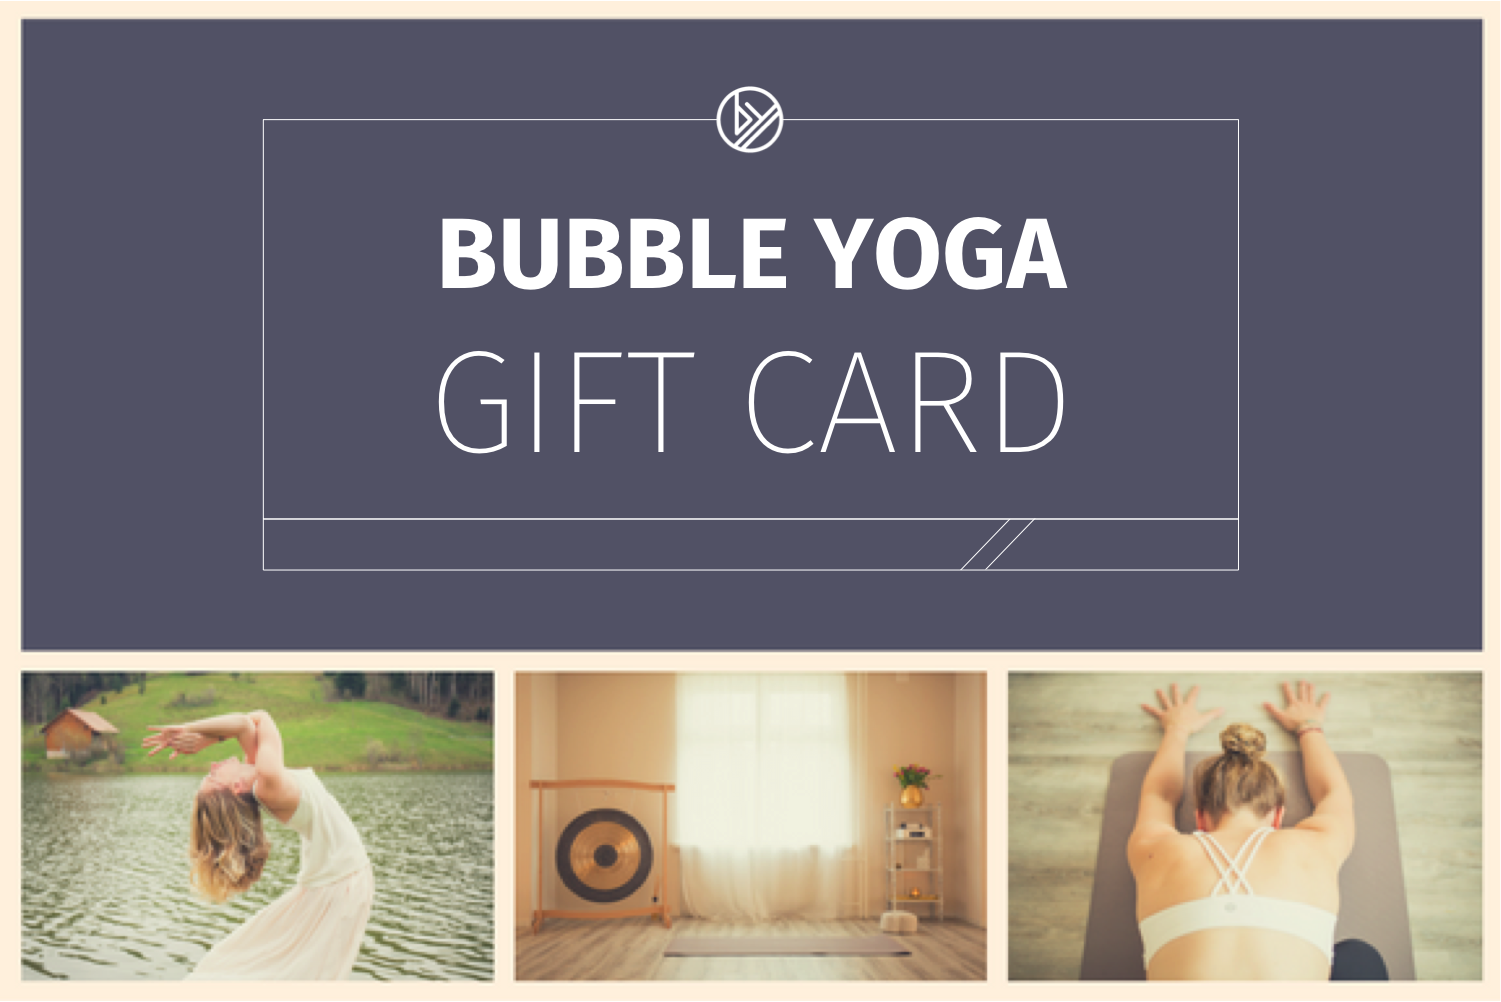 BUBBLE YOGA GIFT CARDS